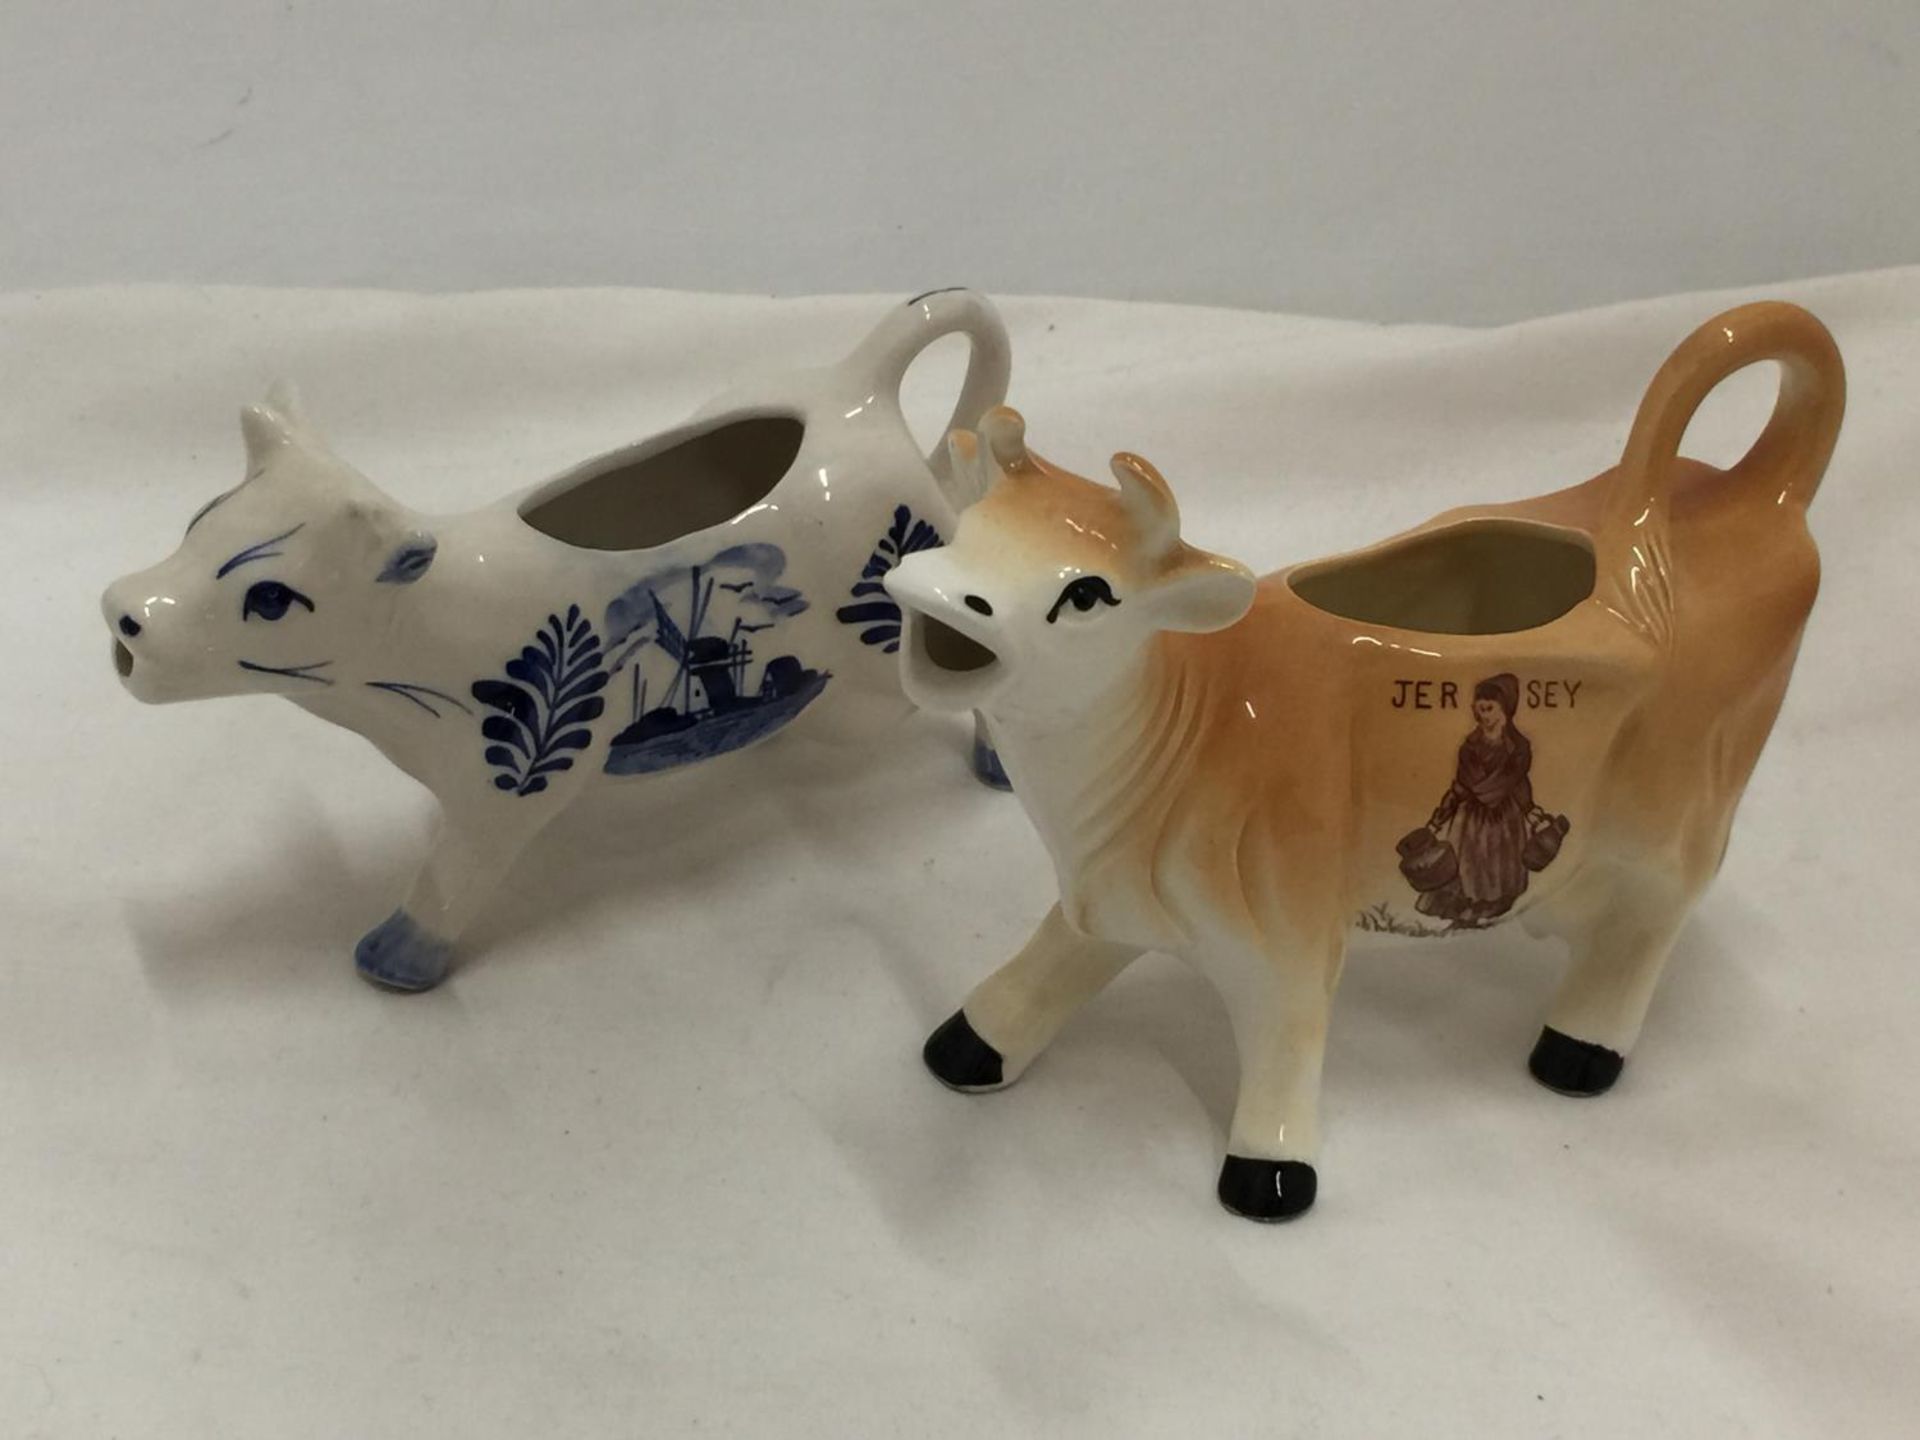 A DELFT BLUE HANDPAINTED COW CREAMER AND A JERSEY COW CREAMER